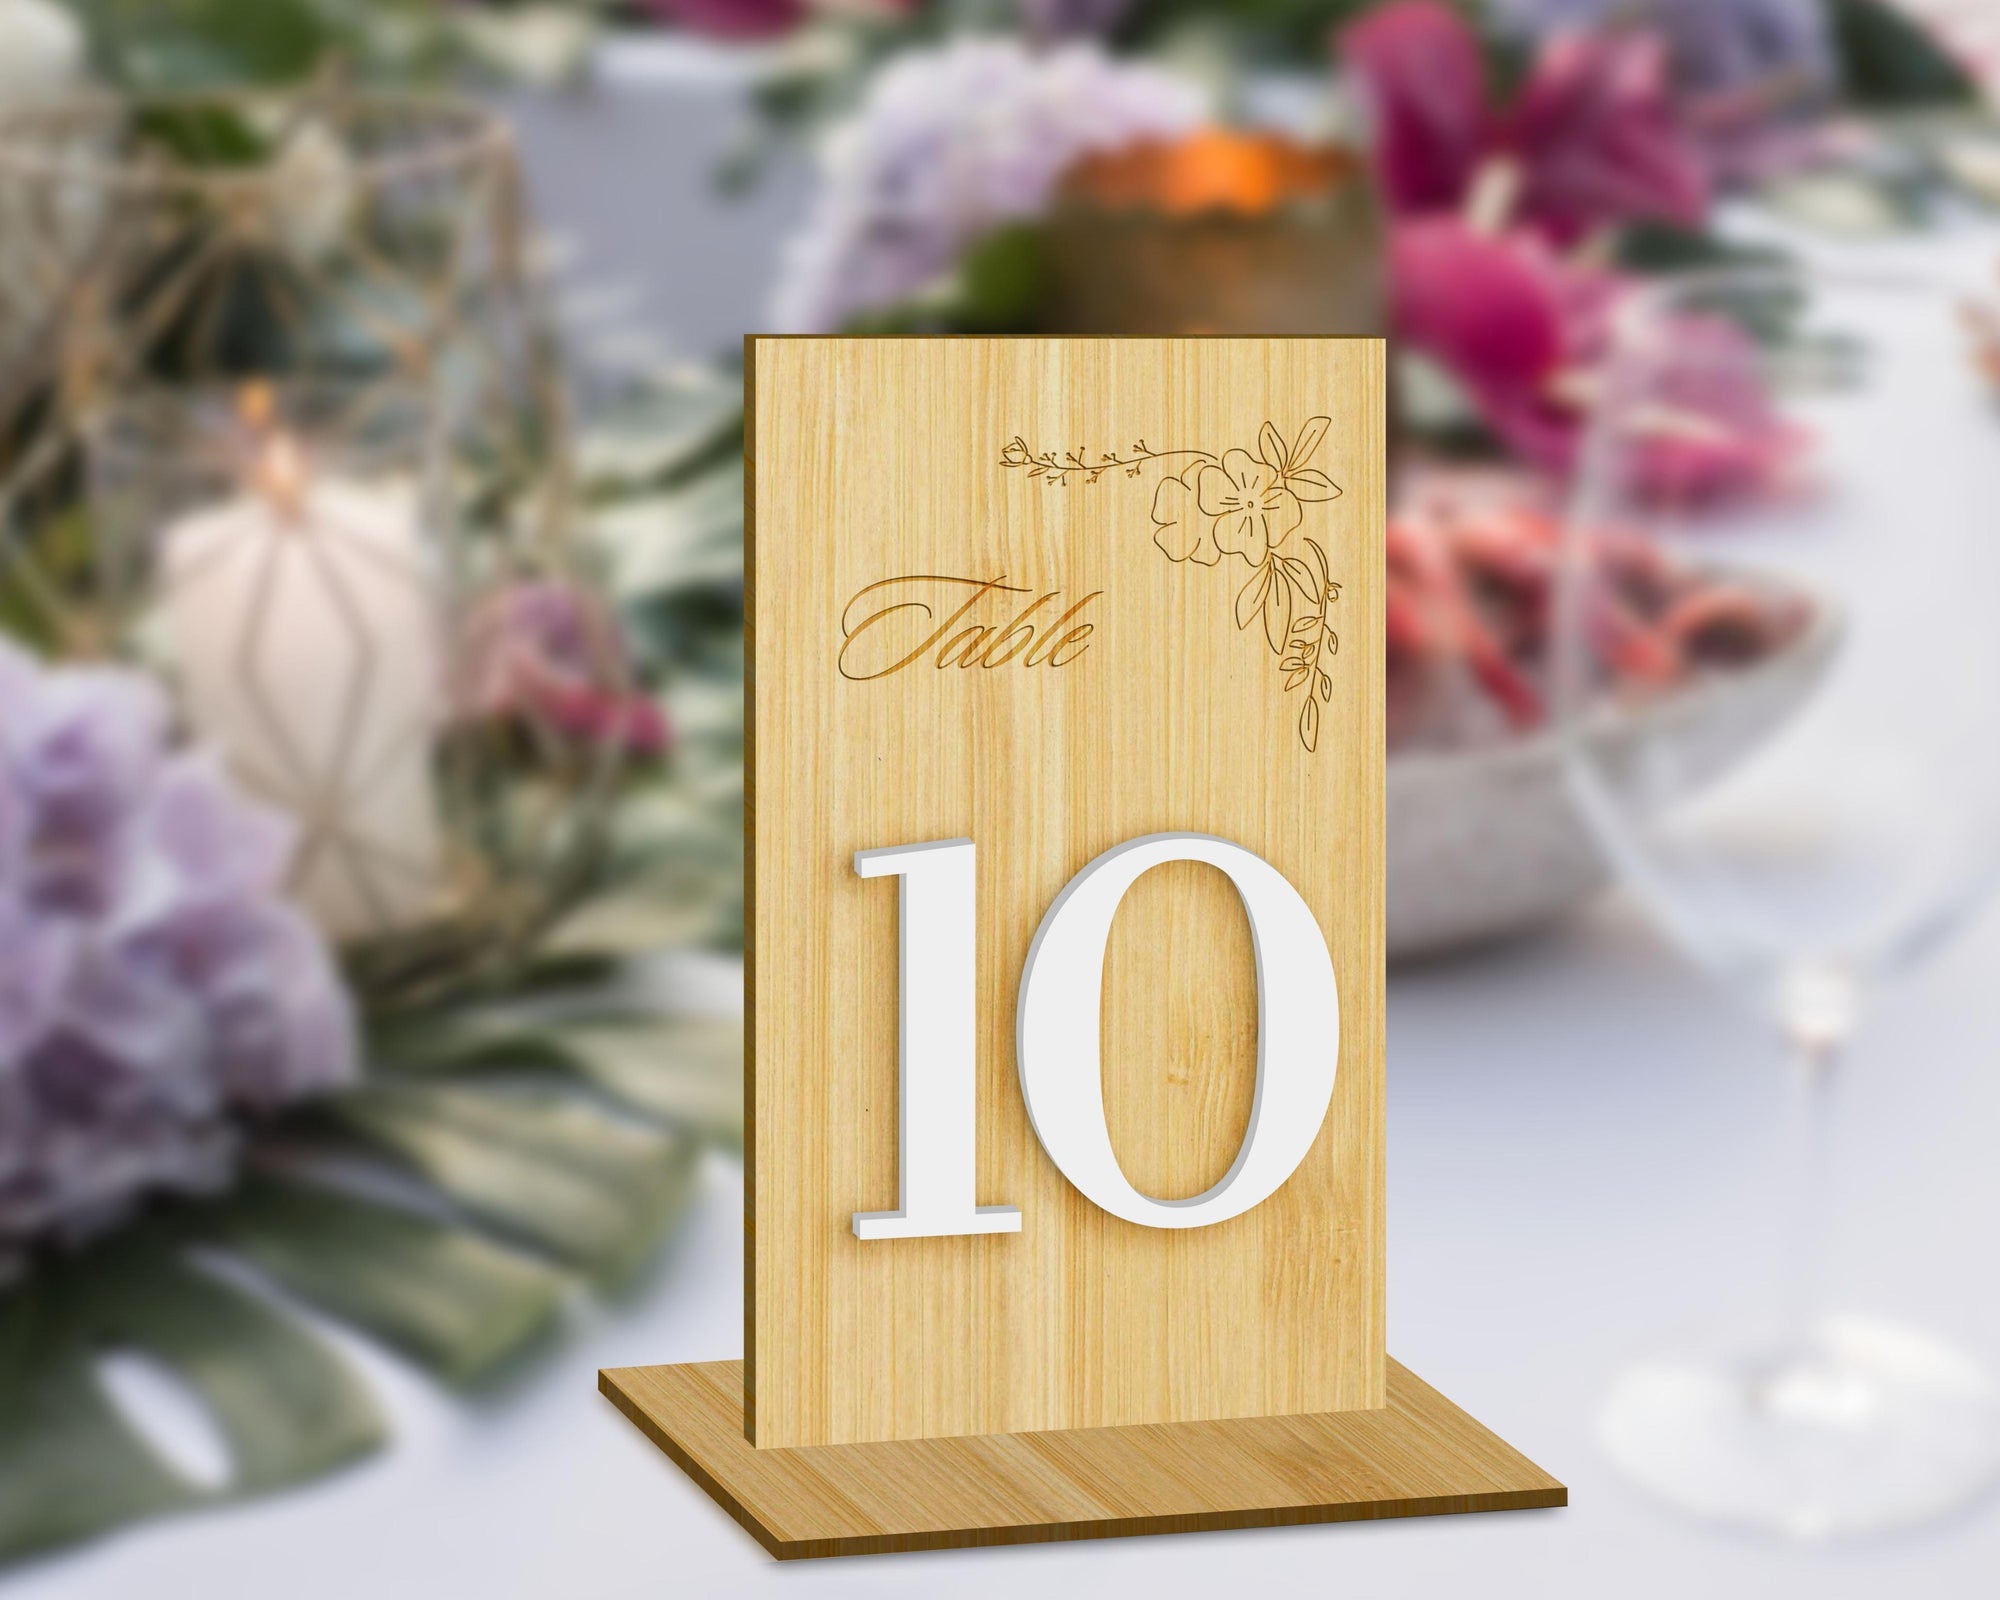 Personalised Engraving &amp; 3D Raised Wooden Laminated Plywood Wedding Table Number, Custom Tables Plaque, Wedding Decor Ceremony Event Signs